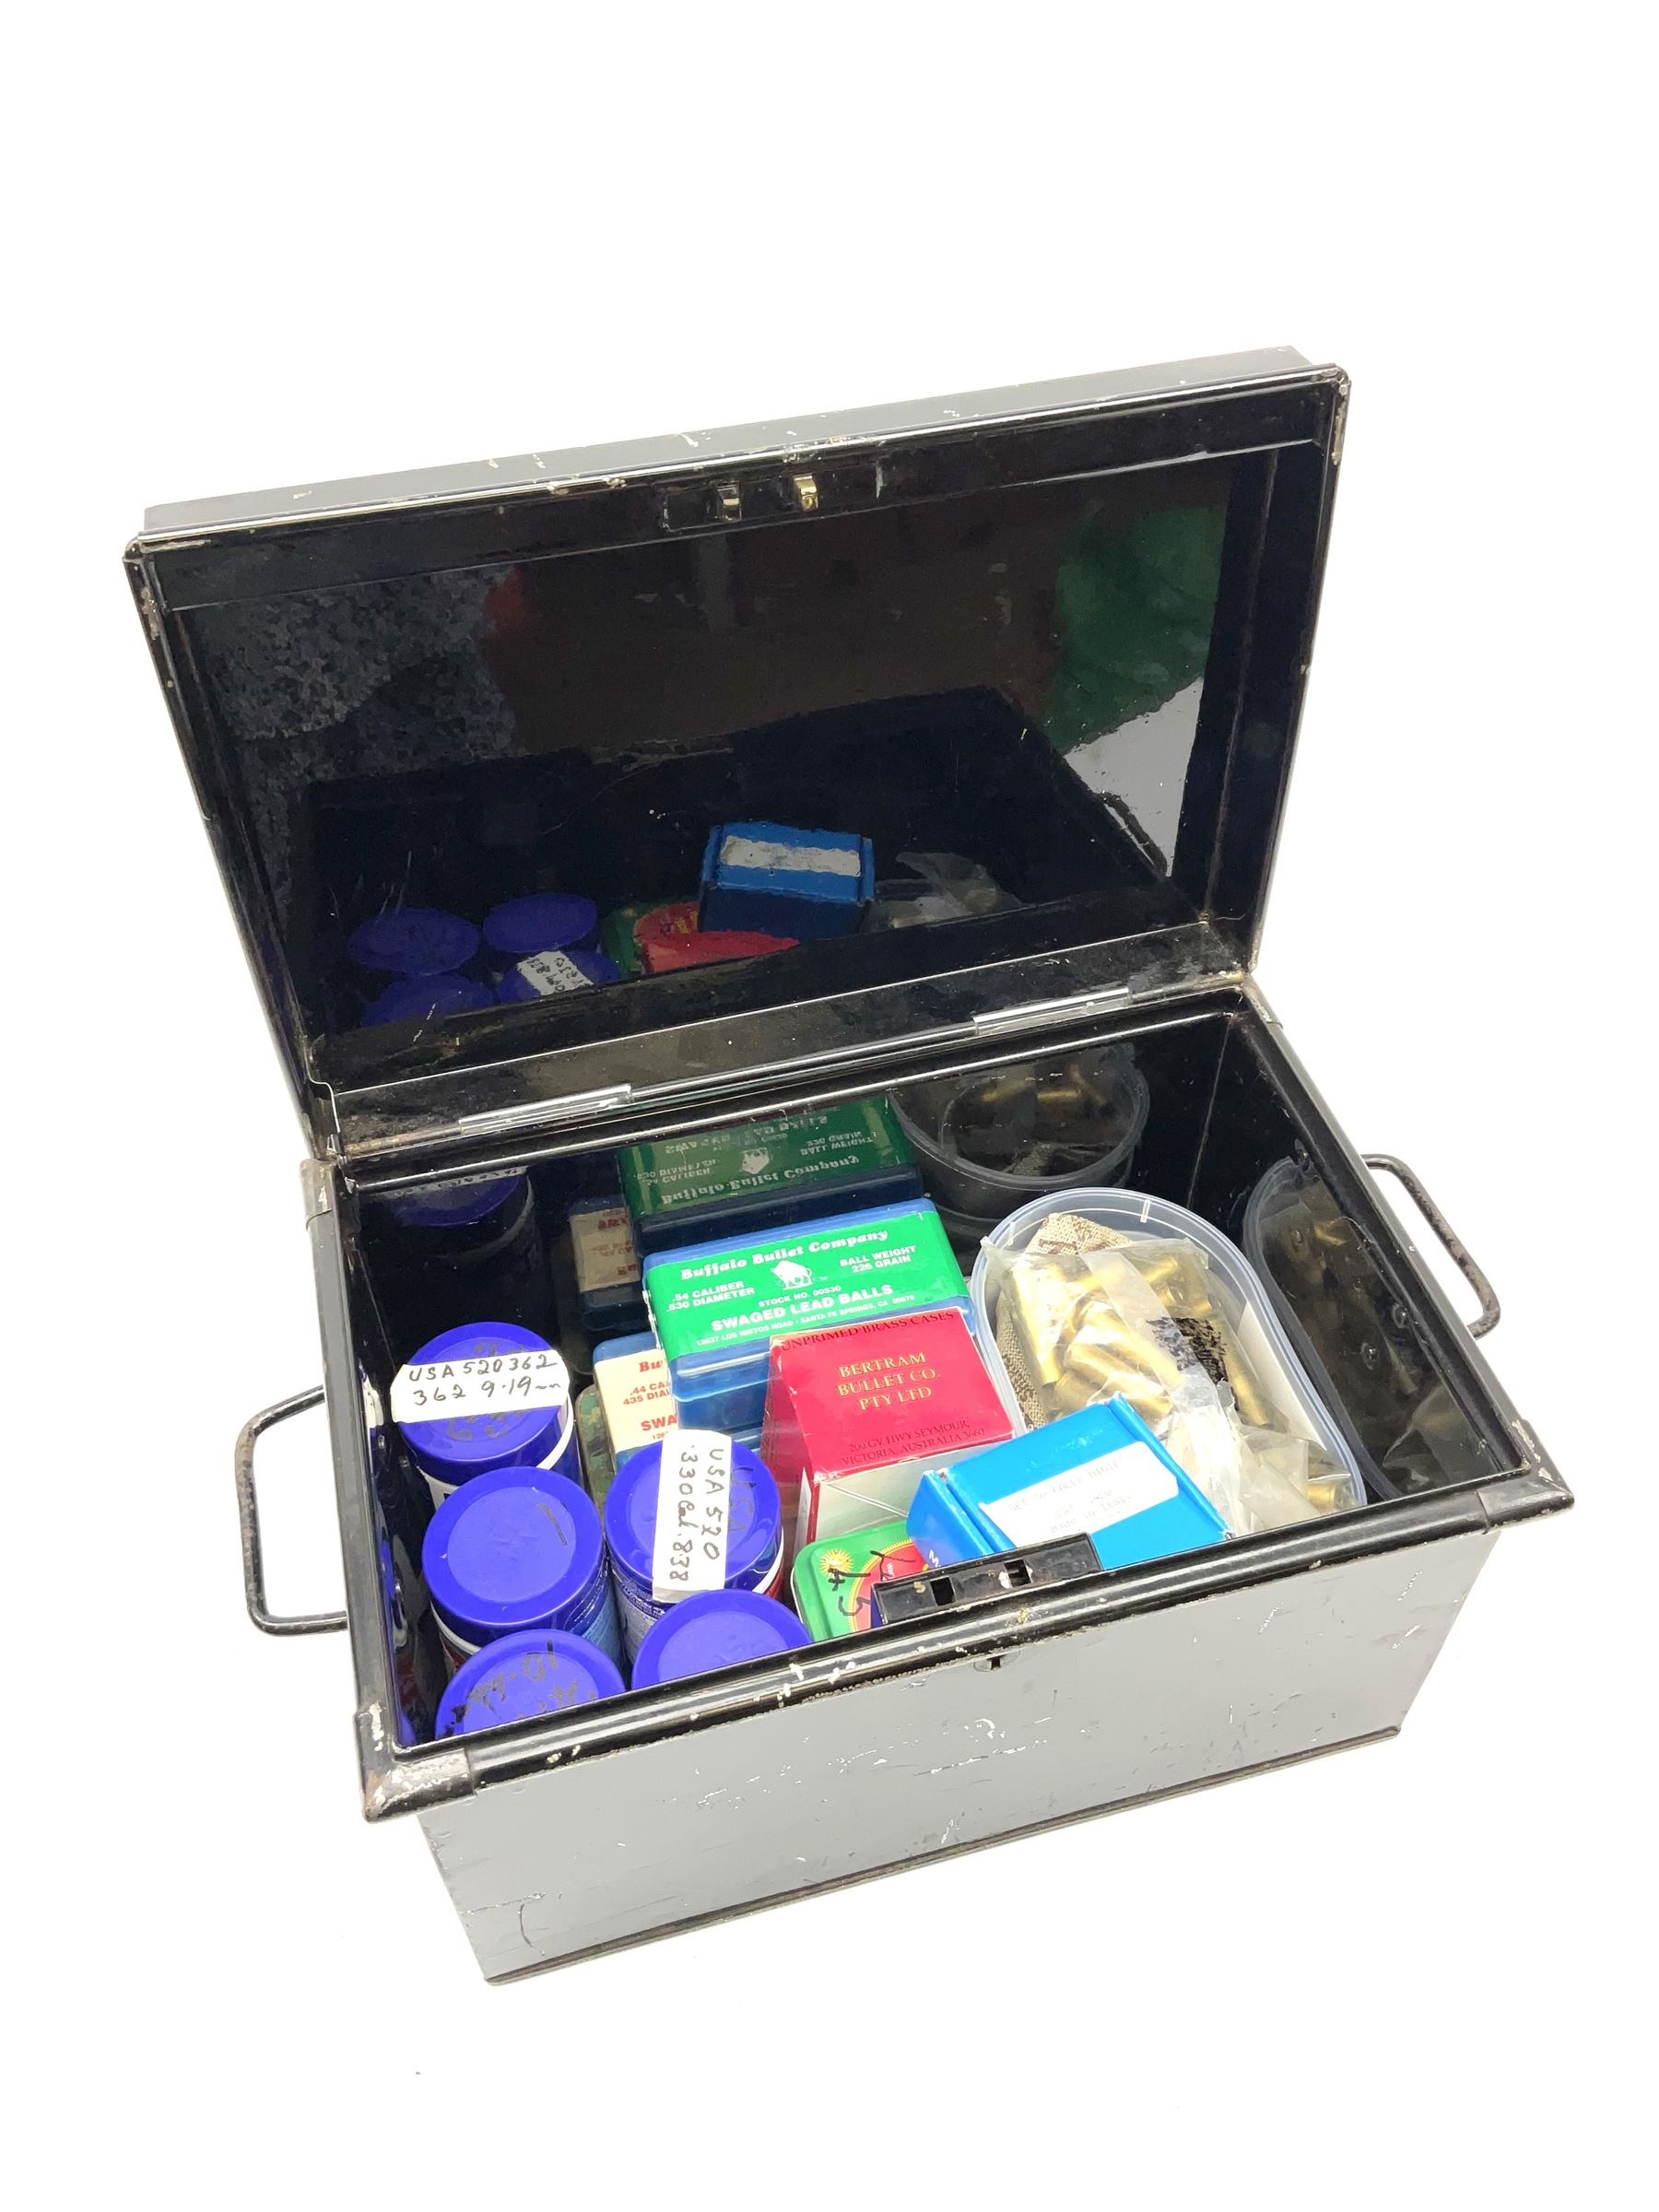 Tin deed box containing quantity of various gauge cartridge re-loading materials including brass